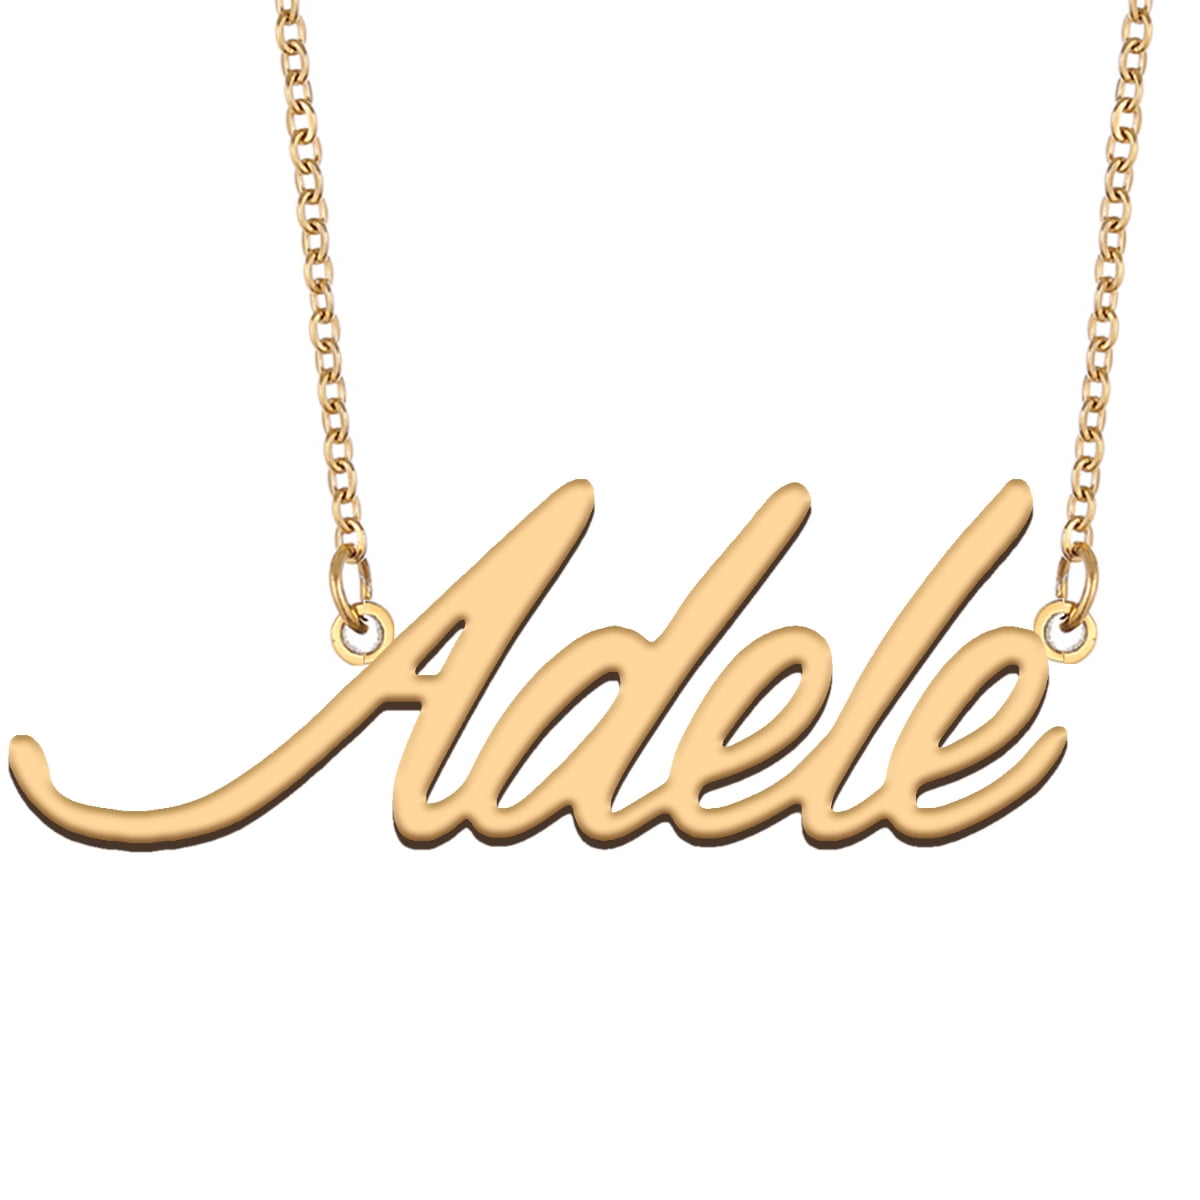 Stainless Steel Silver Gold Black Rose Gold Color Baby Name Ioan Engraved Personalized Gifts For Son Daughter Boyfriend Girlfriend Initial Customizable Pendant Necklace Dog Tags 24 Ball Chain